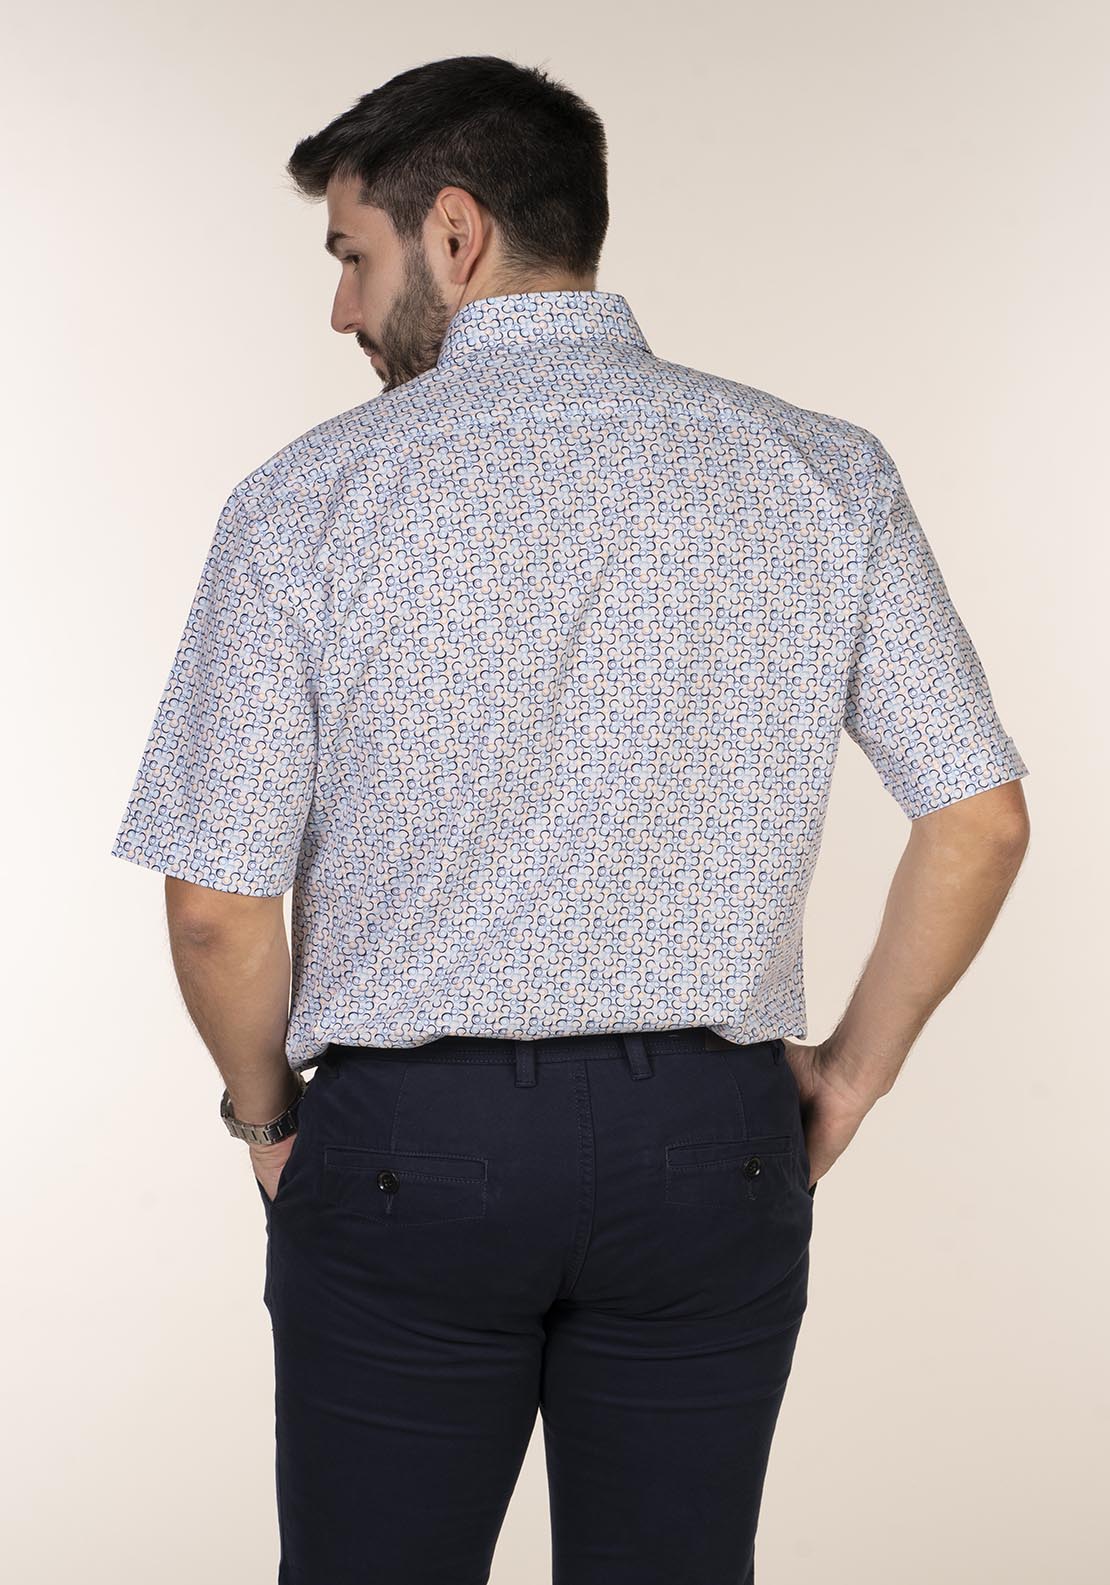 Yeats Casual Patterned Short Sleeve Shirt 4 Shaws Department Stores